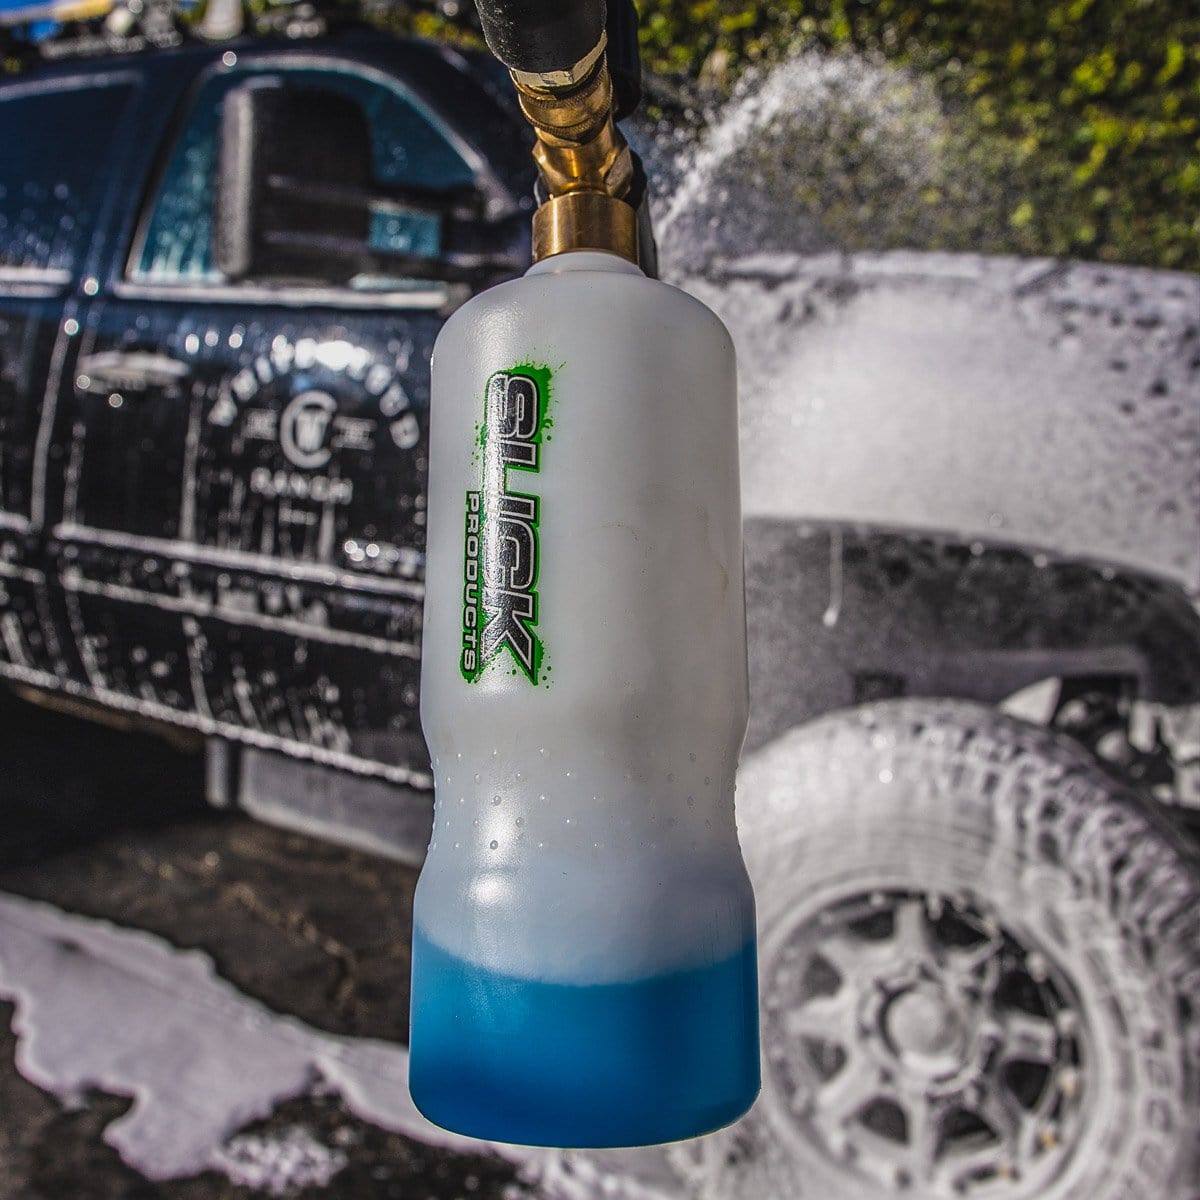  Slick Products Garden Hose Foam Gun Scrub Brush Off-Road Wash -  Super Concentrated Soap Foam Blaster Removes Heavy Dirt and Mud from Car,  Truck, Motorcycle, Dirt Bike, ATV, UTV, and Toy